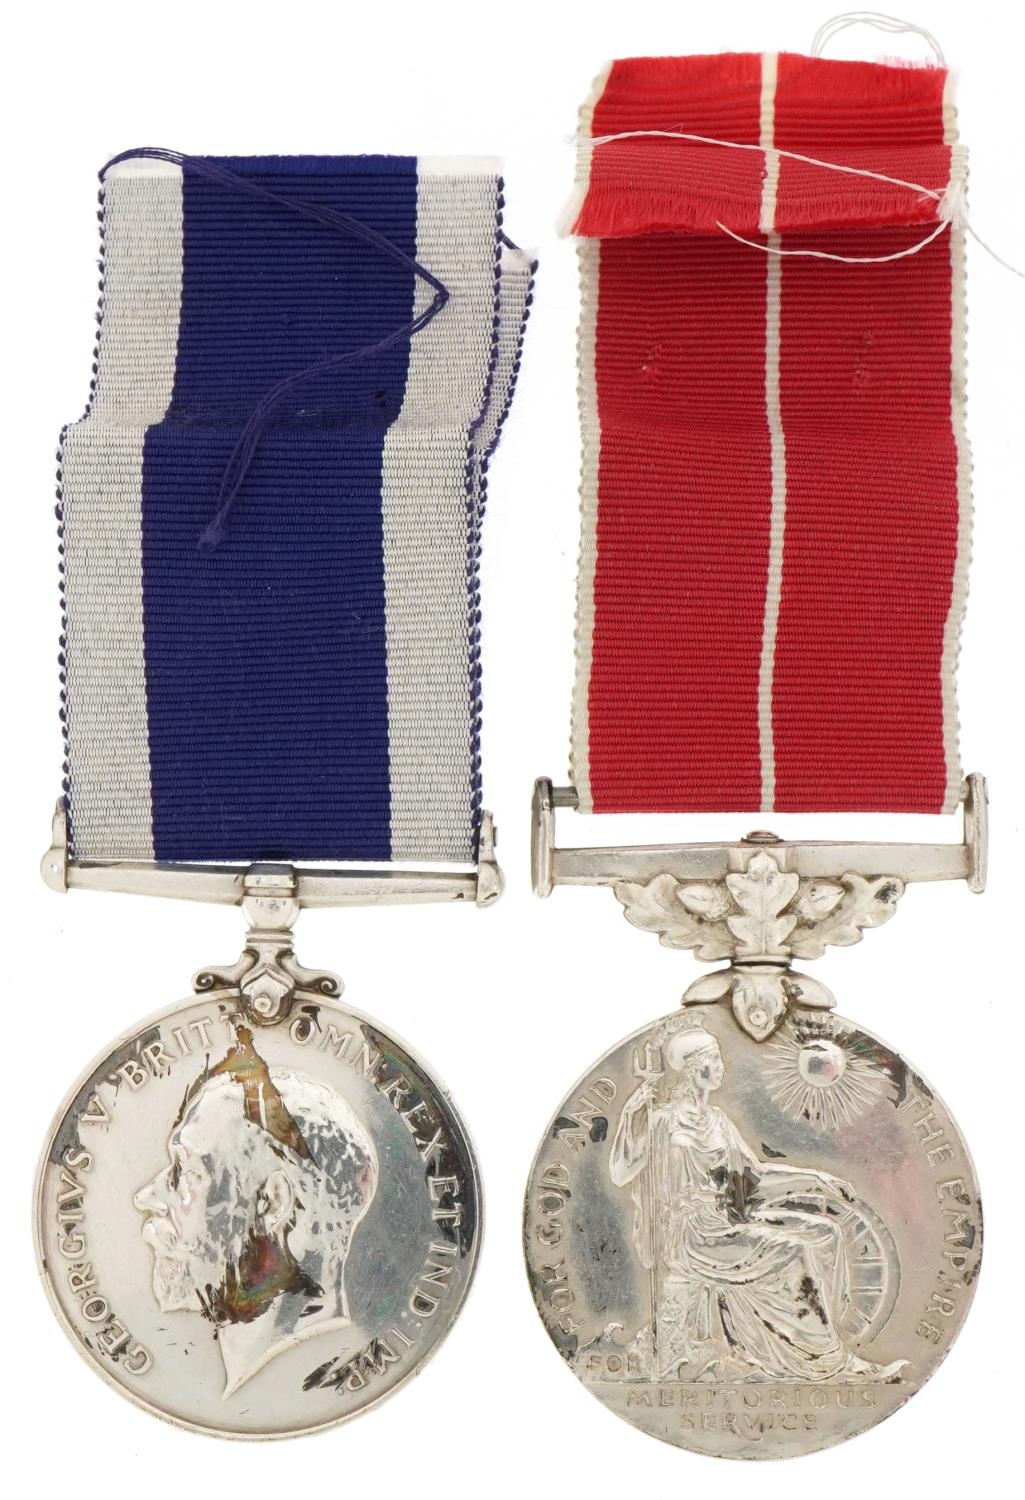 British military naval medals for Long Service and Good Conduct and a Meritorious Service awarded to - Image 2 of 5